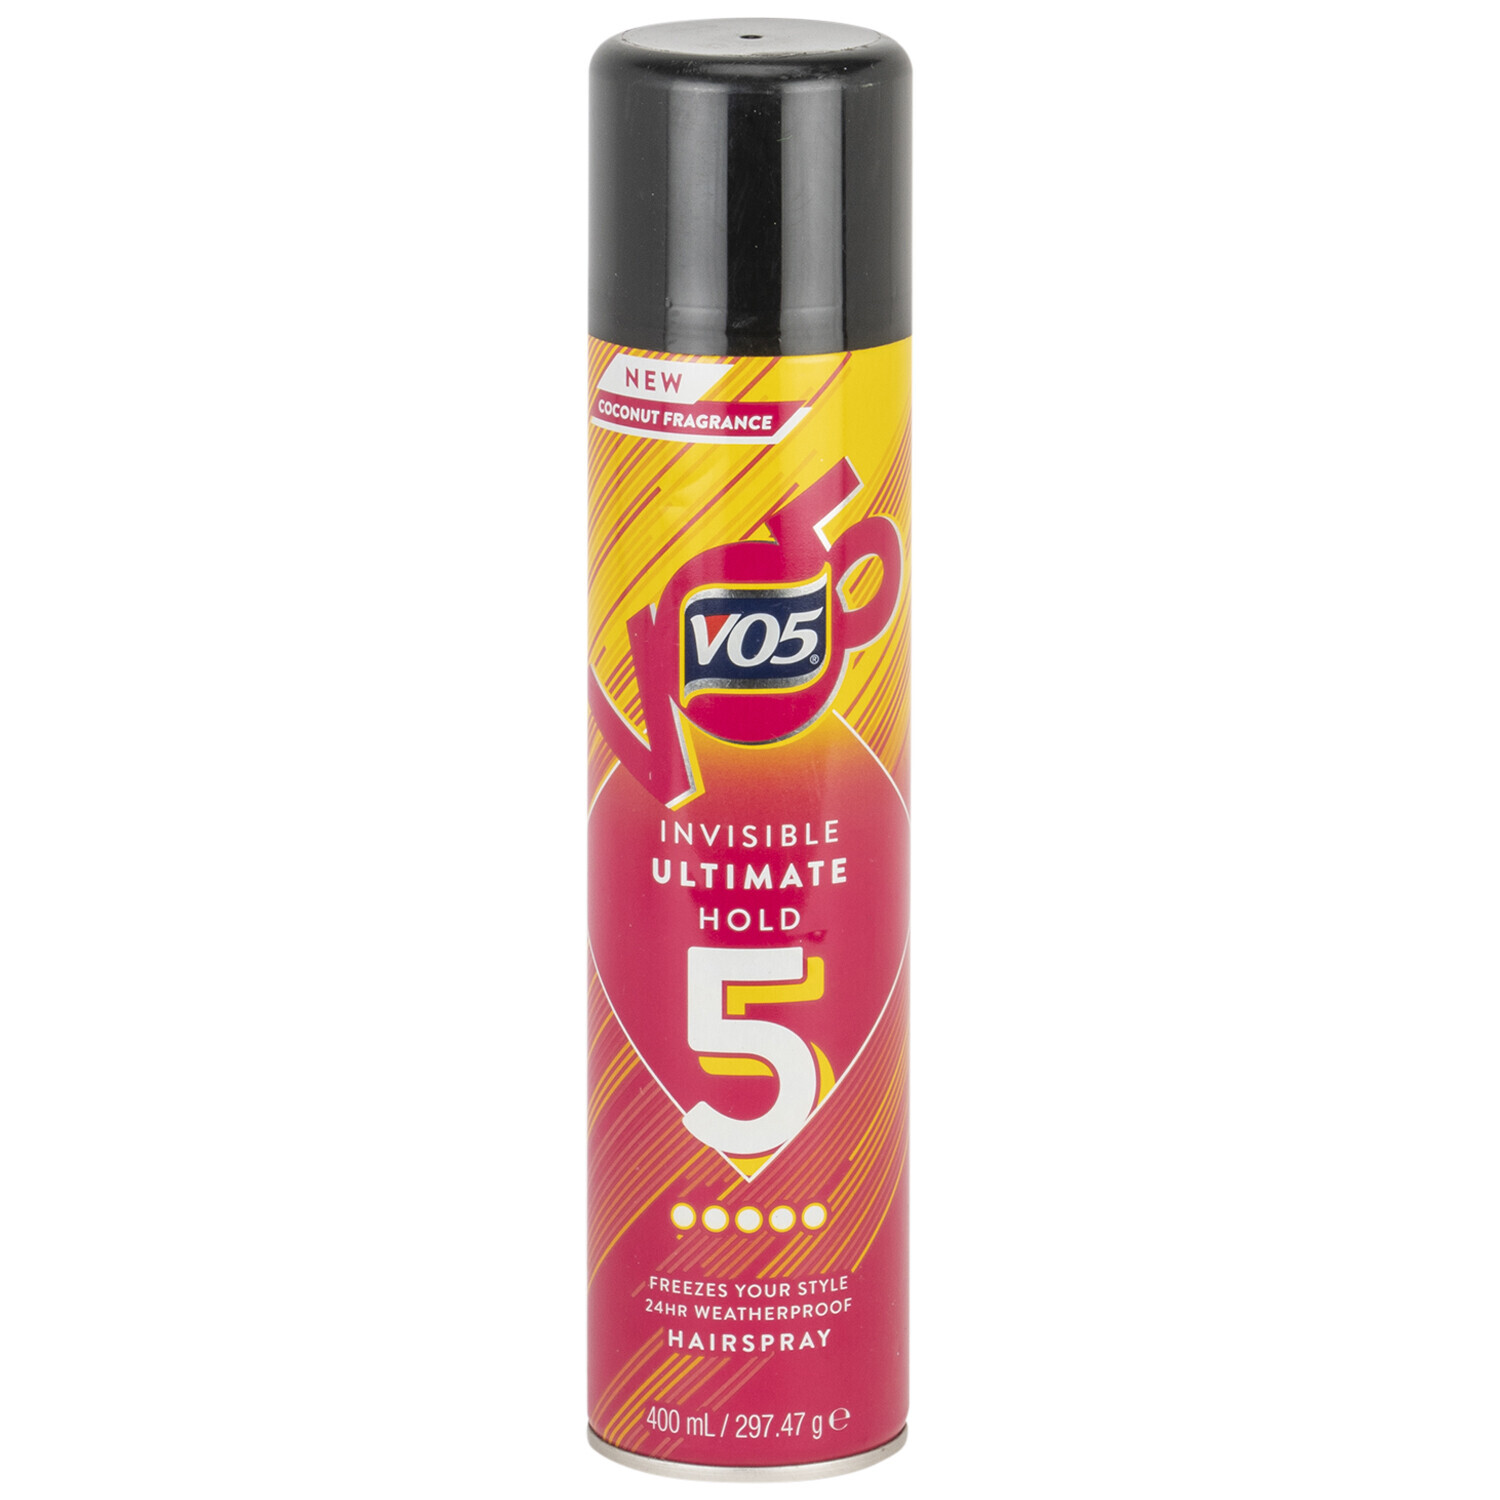 VO5 Invisible Ultimate Hold Hairspray Image 1